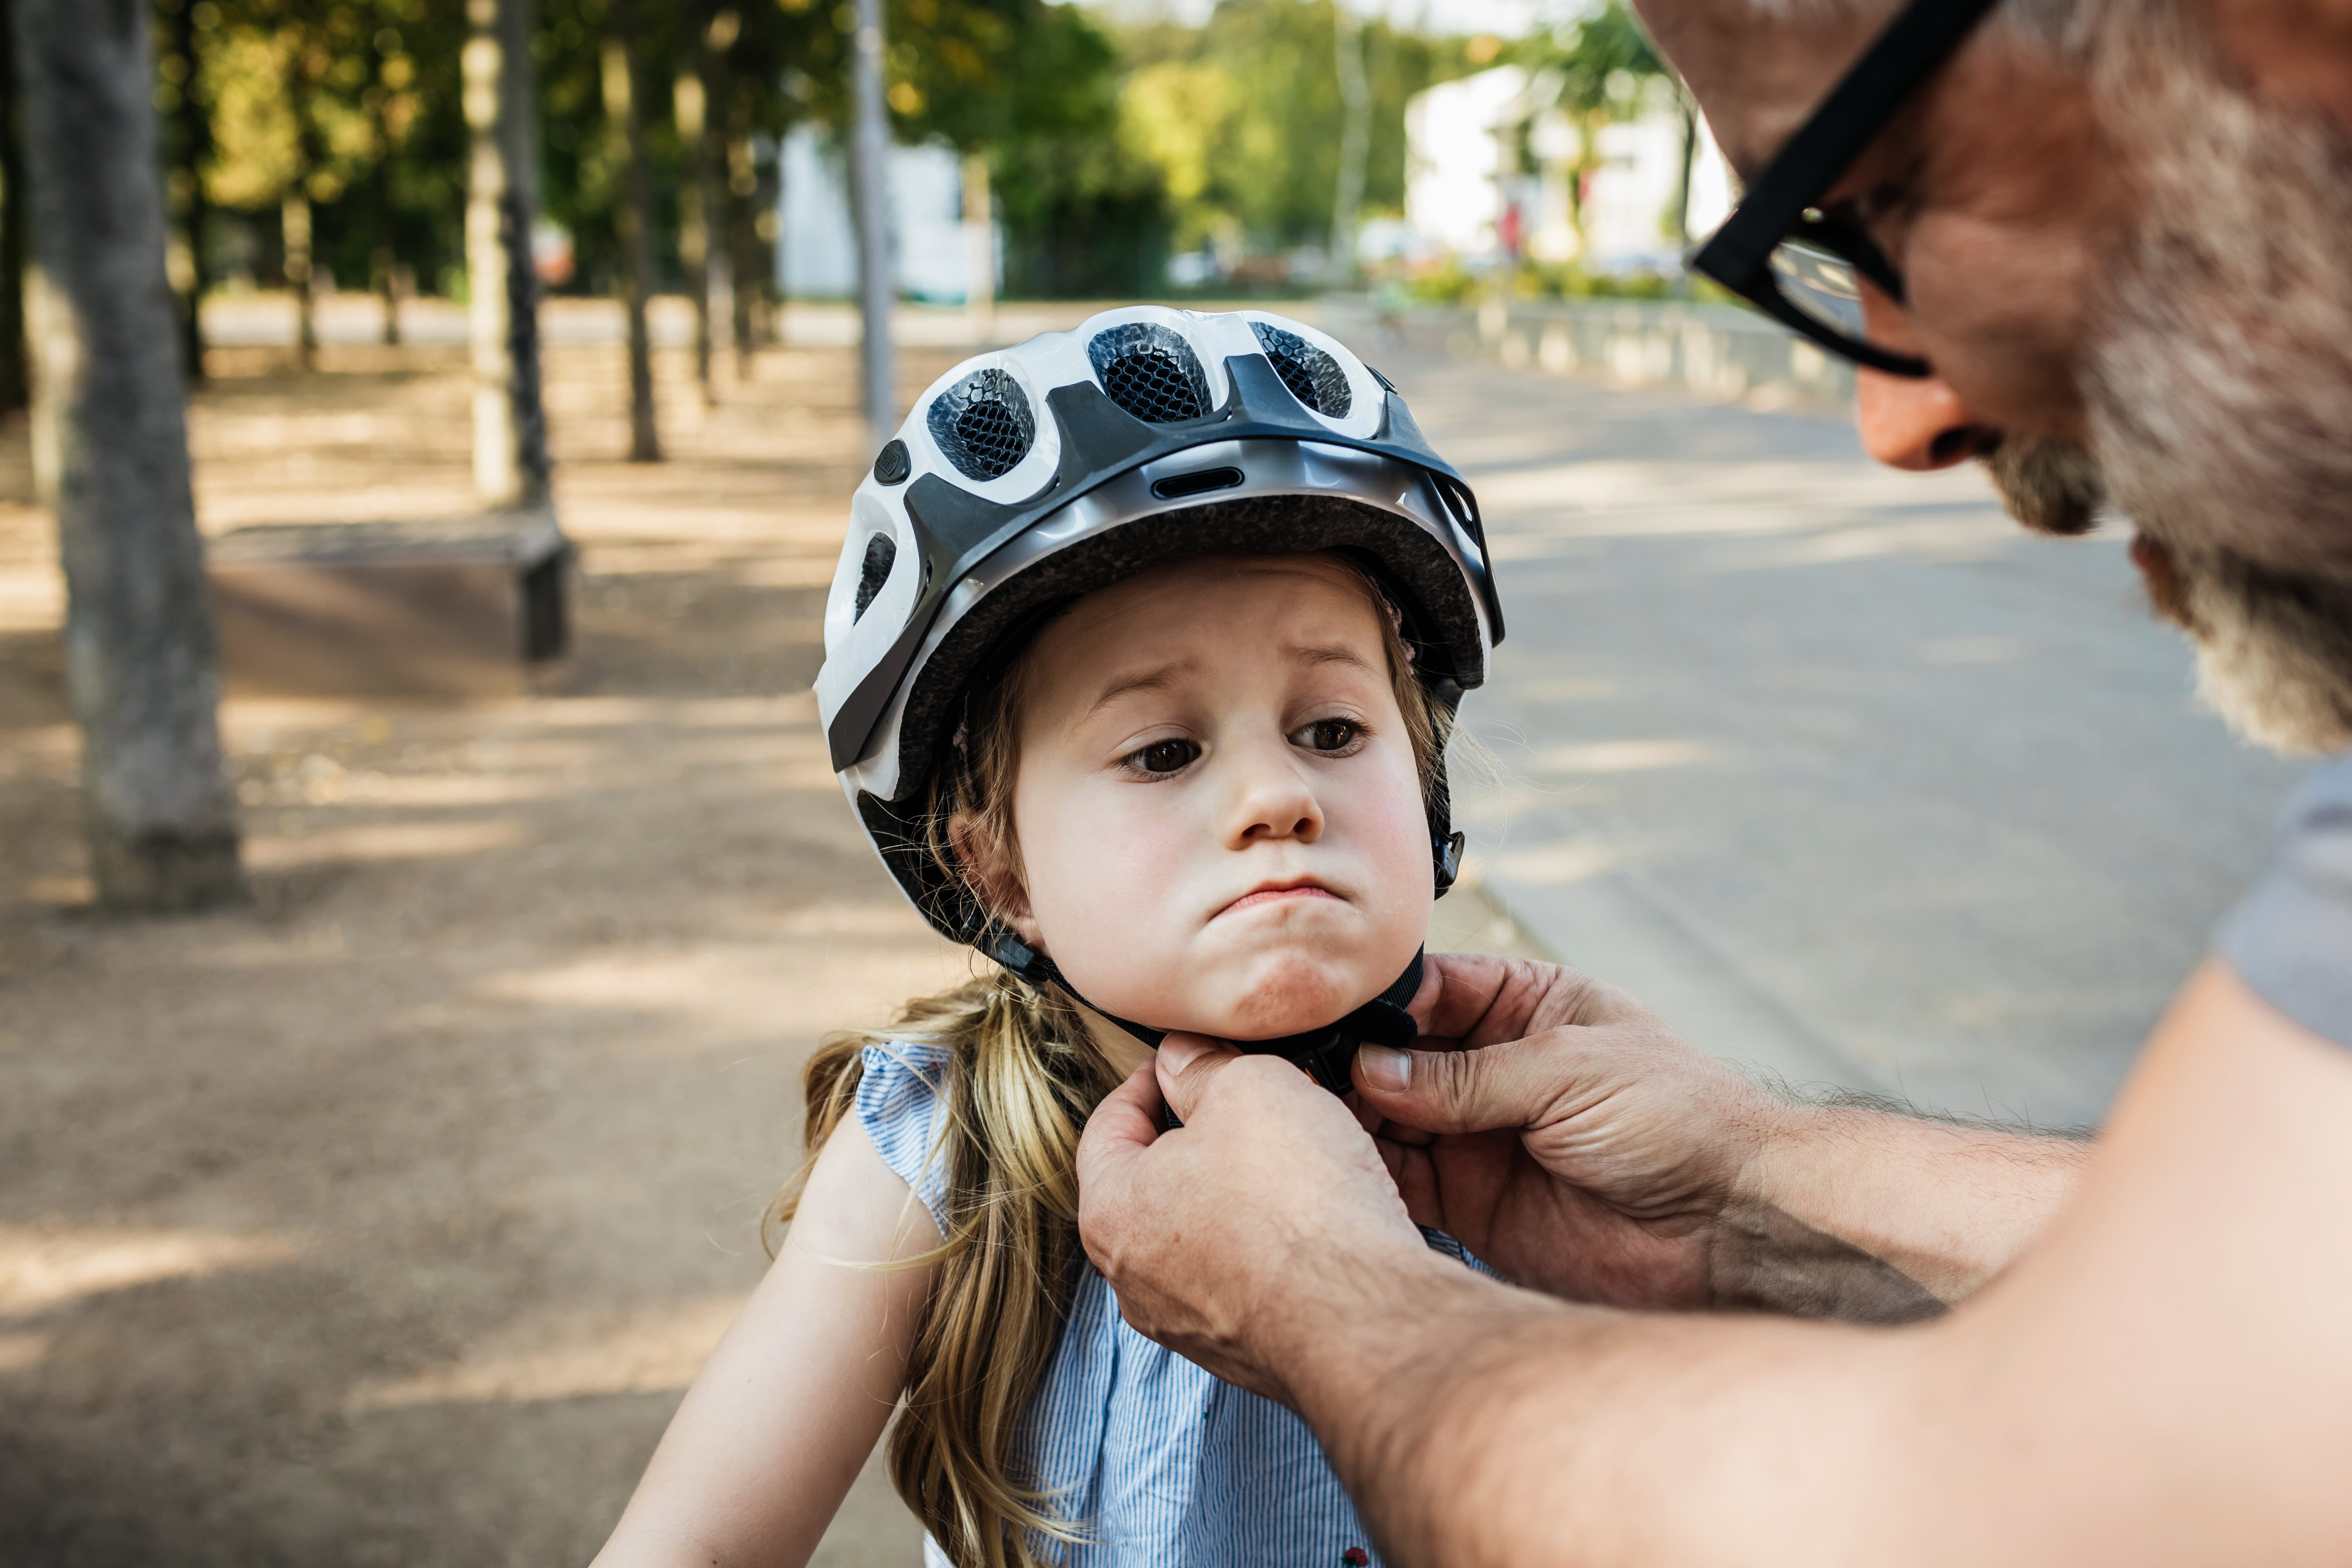 bike accidents without helmets